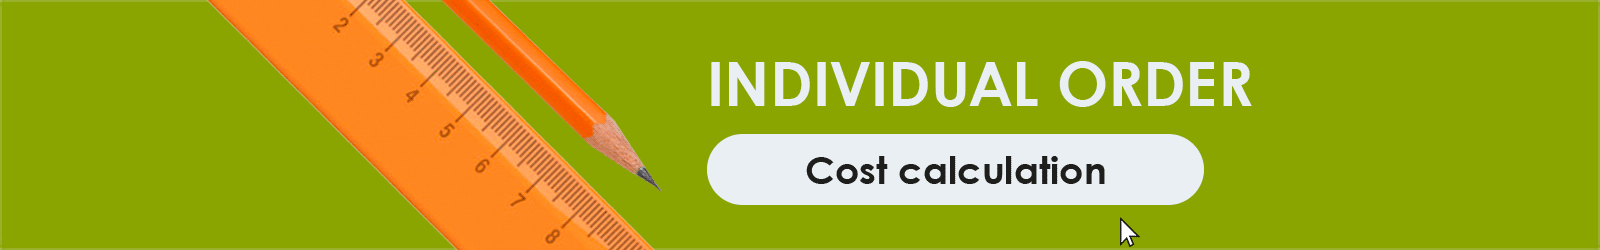 Individual order. Cost calculation